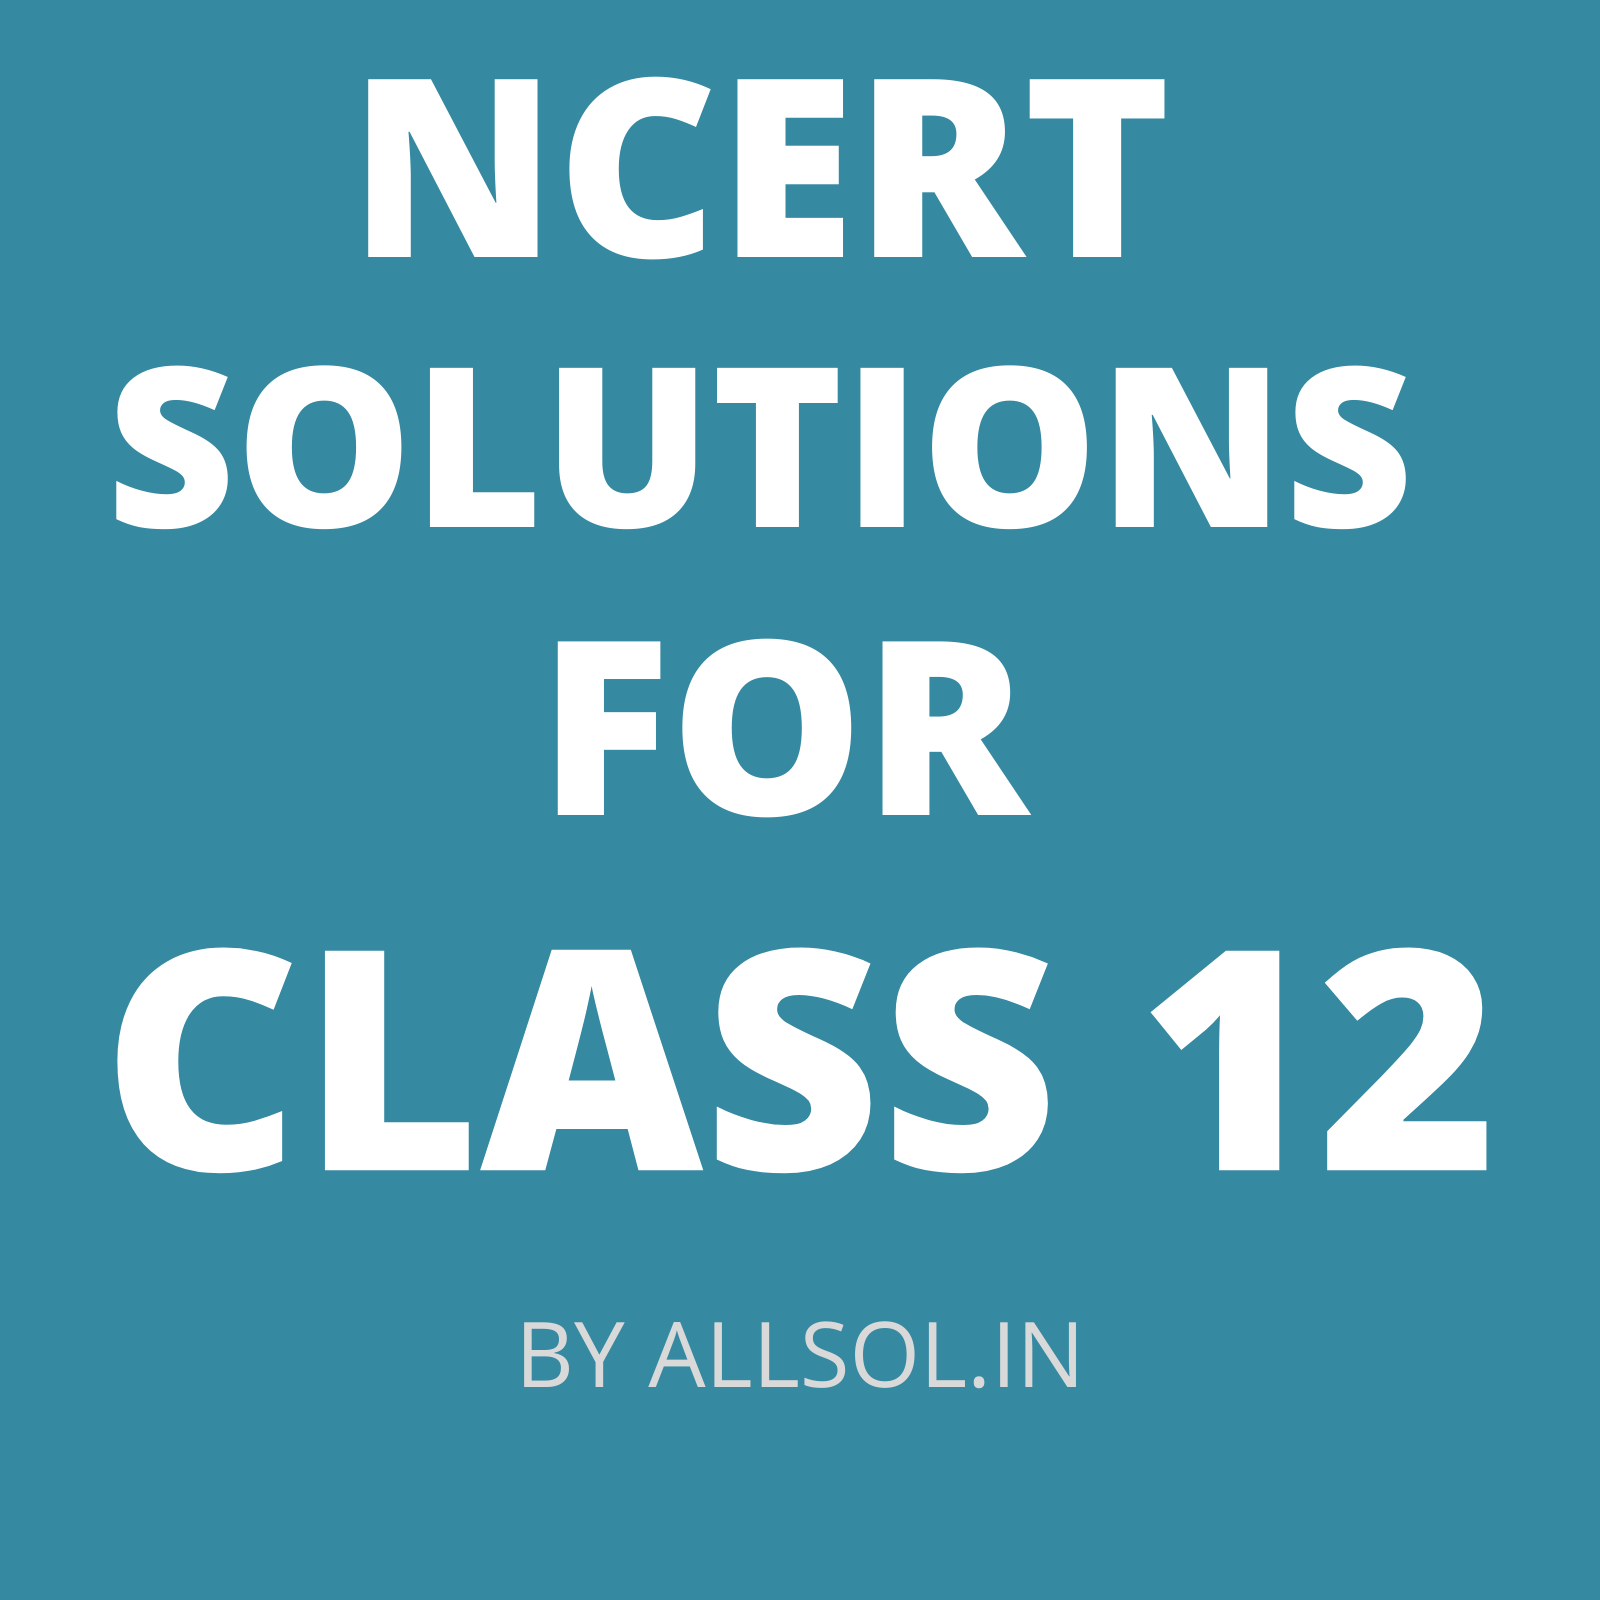 NCERT Solutions for Class 12 |